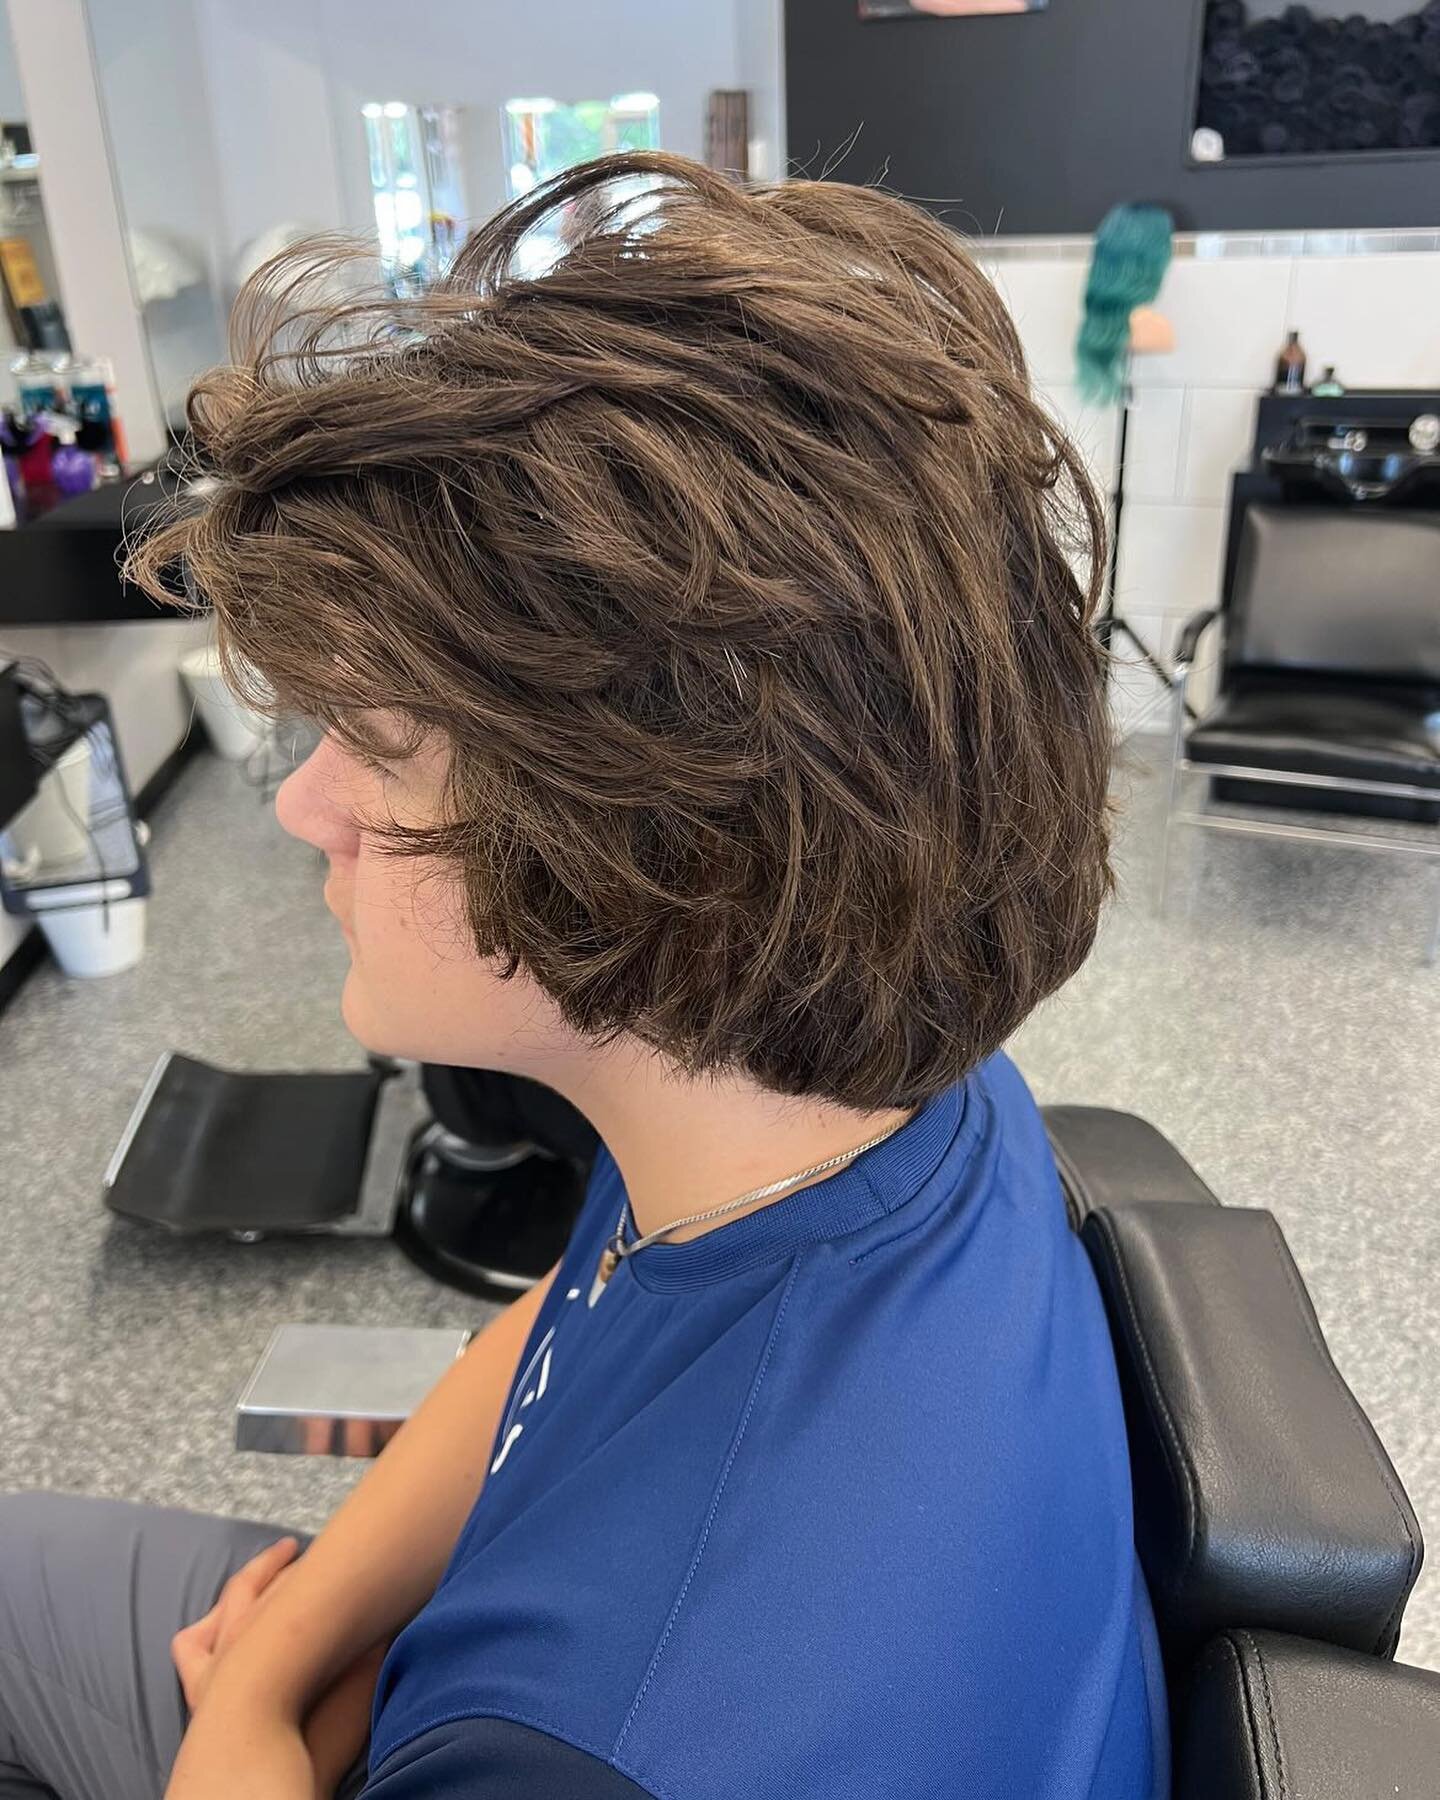 From Flow to Fresh

The ultimate hockey hair transformation. From overflowing hockey hair to one of the most popular haircuts right now. 

This hockey superstar rocked the iconic flow, but it was time for a change this summer. If you want a transform